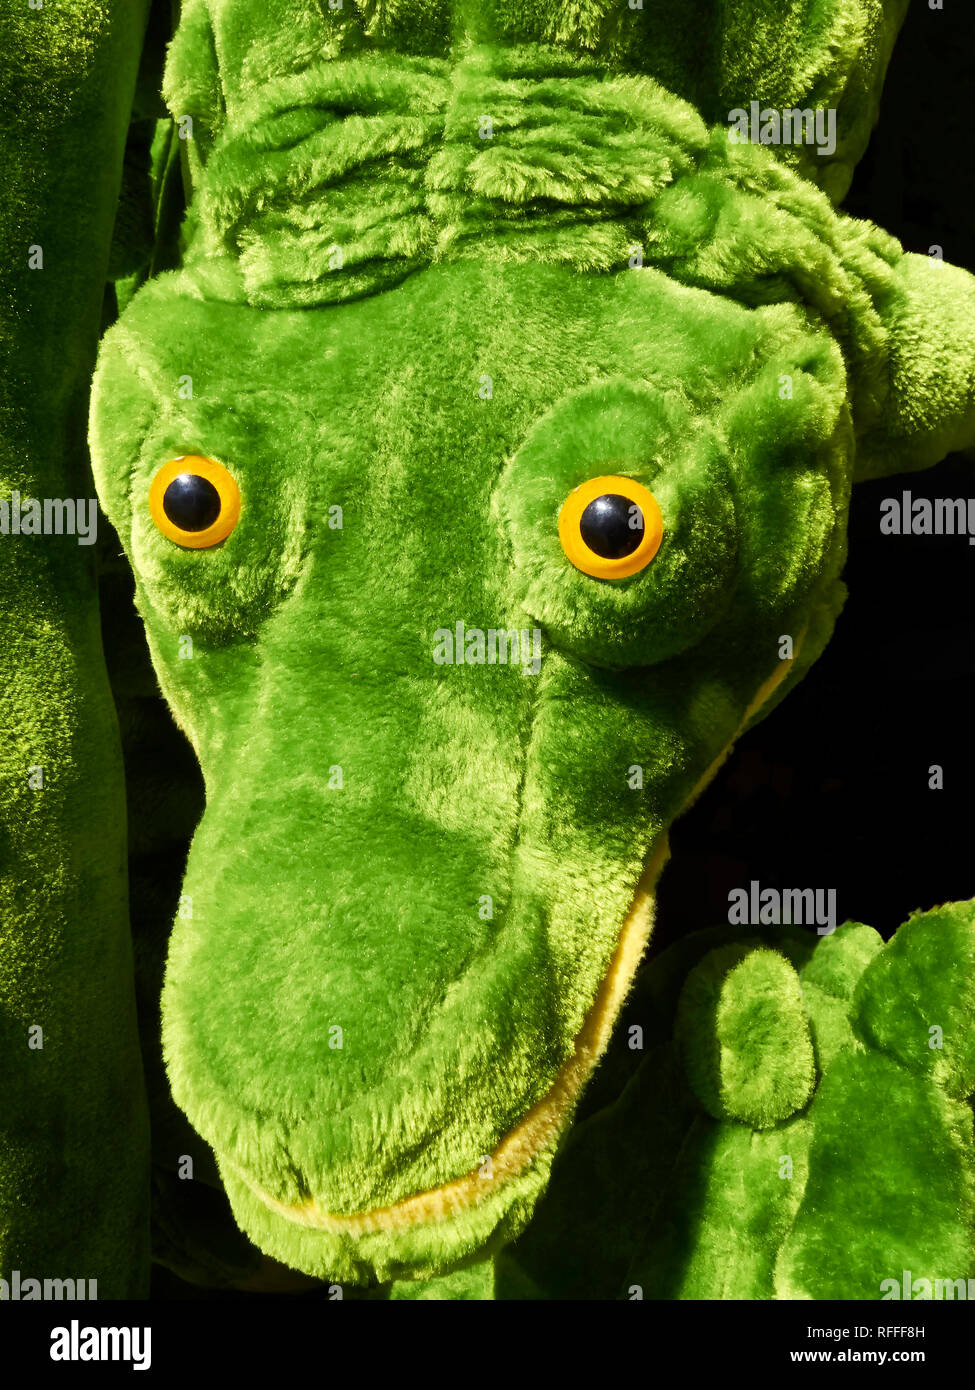 Close-up of a cute, soft green colored stuffed Crocodile toy seen in the Philippines Stock Photo